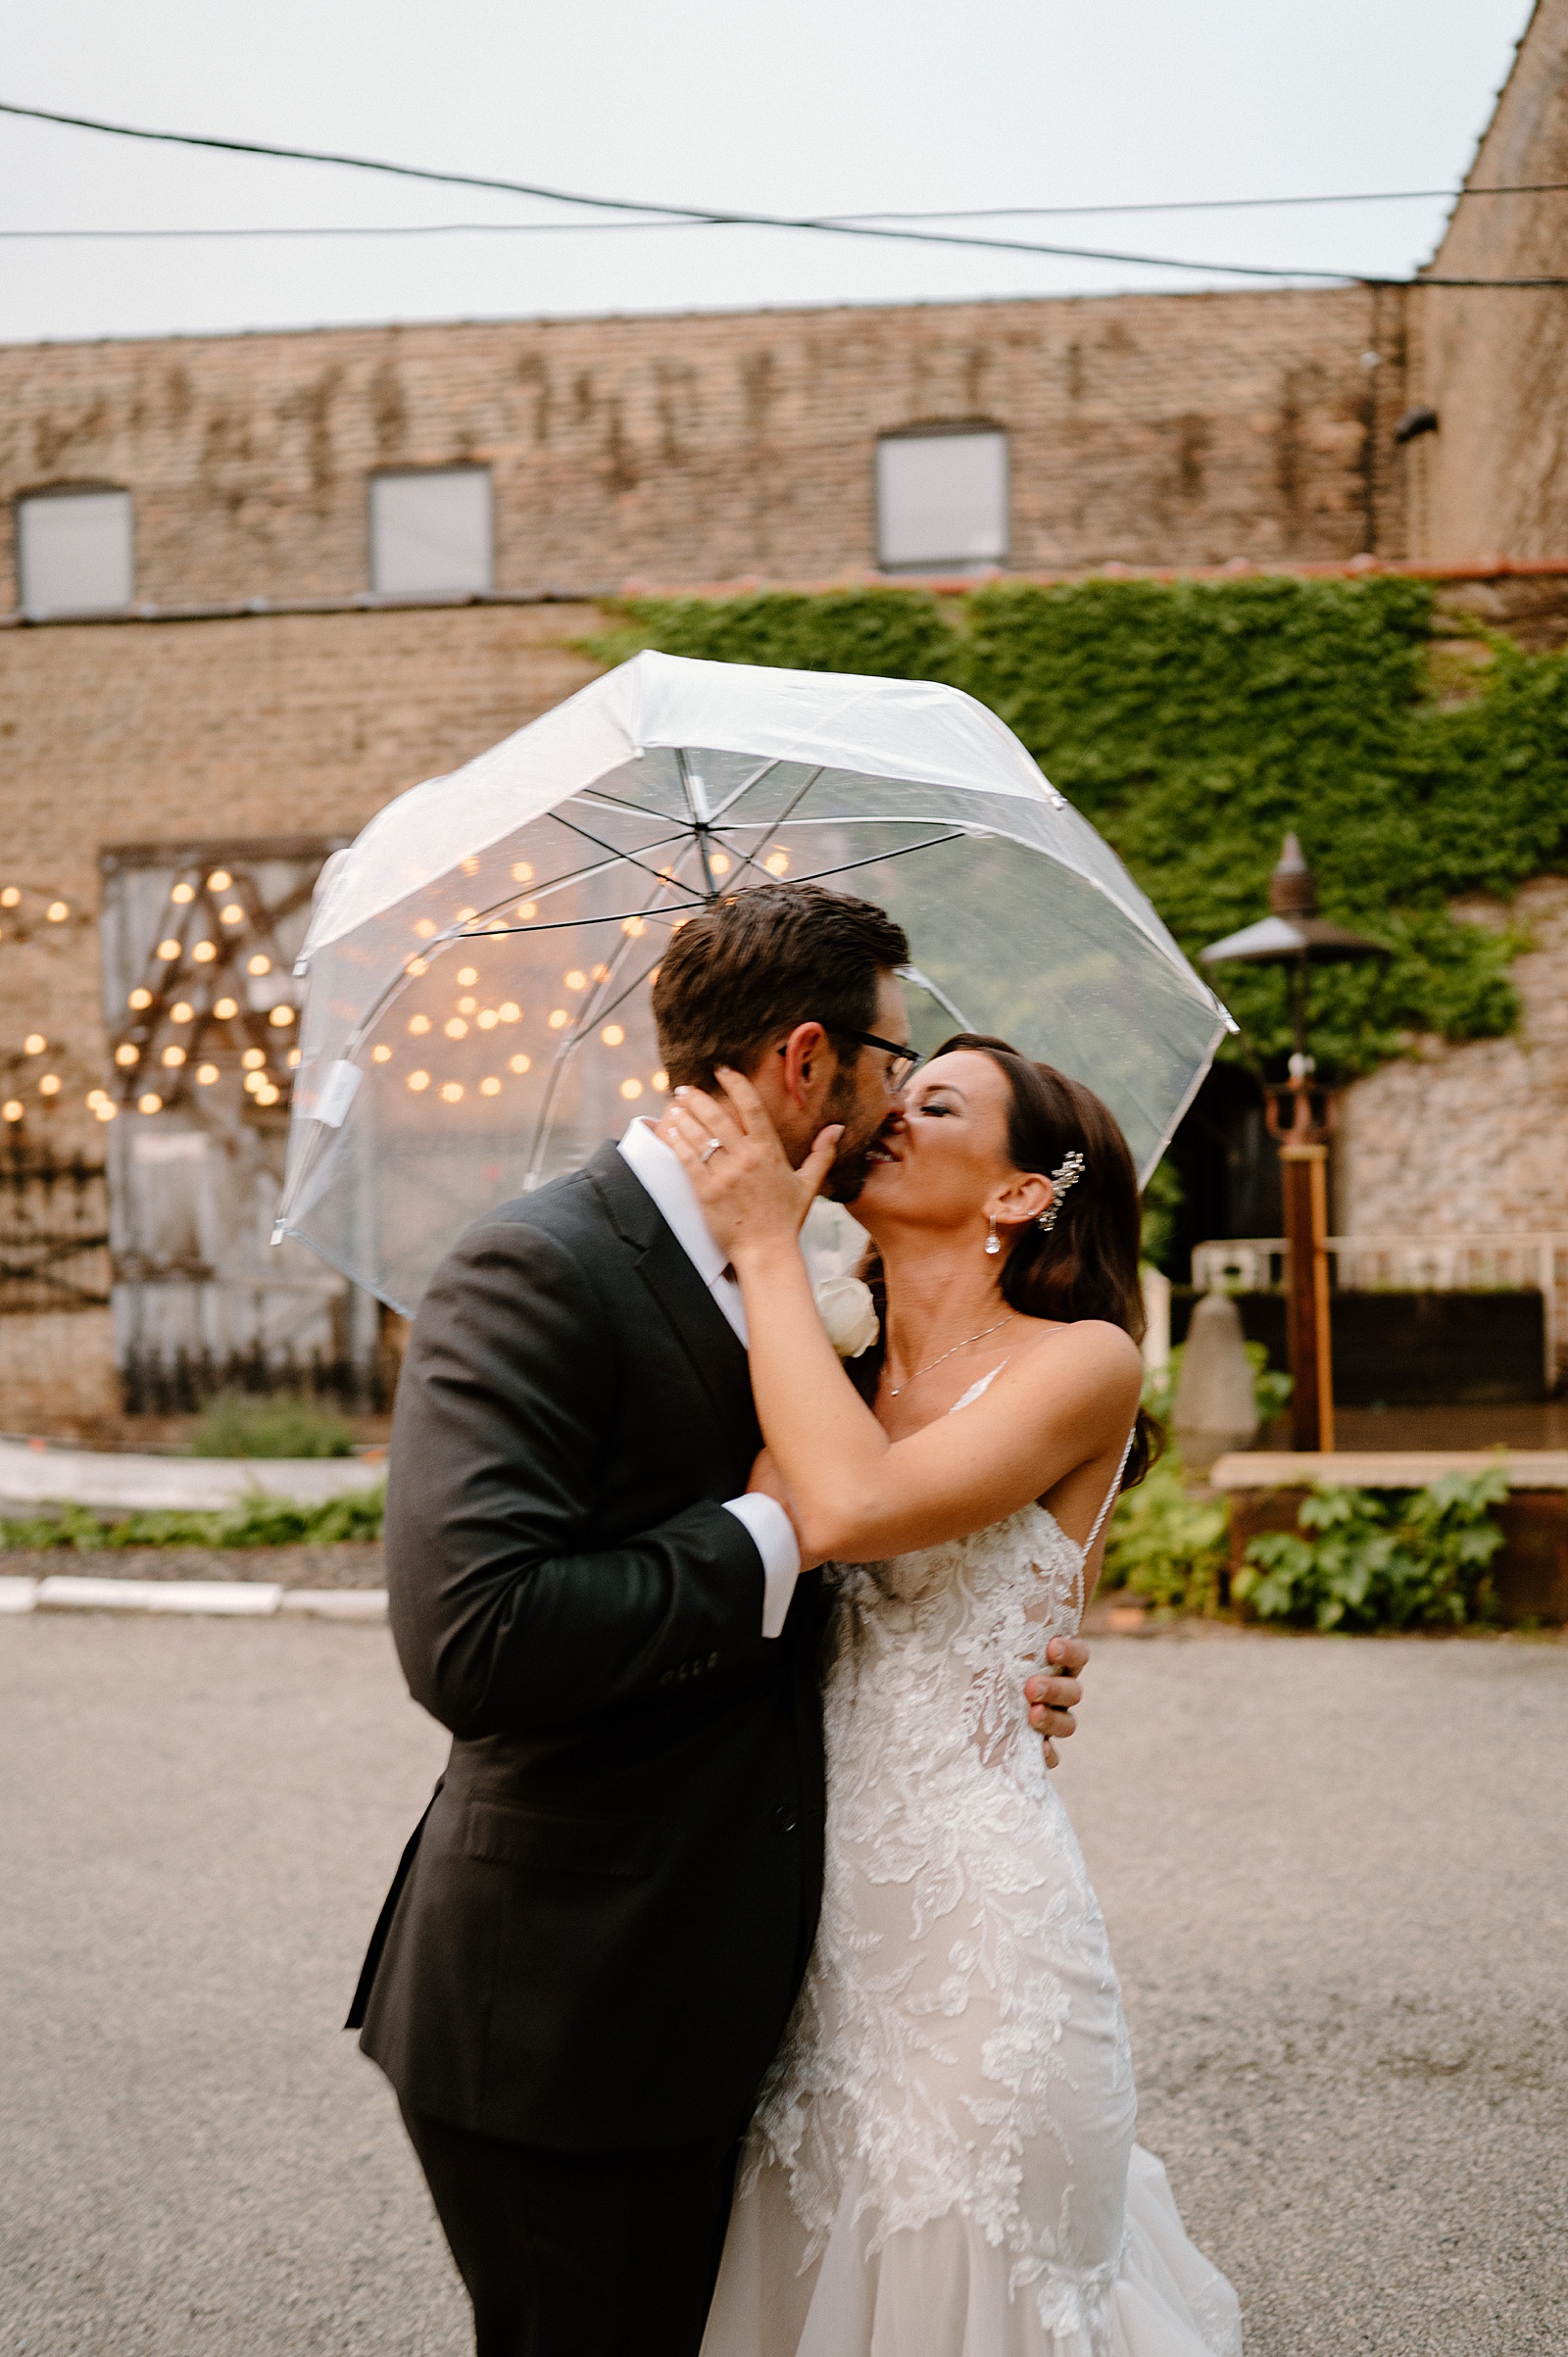 Bride and groom kiss under a clear umbrella for their rainy wedding day 